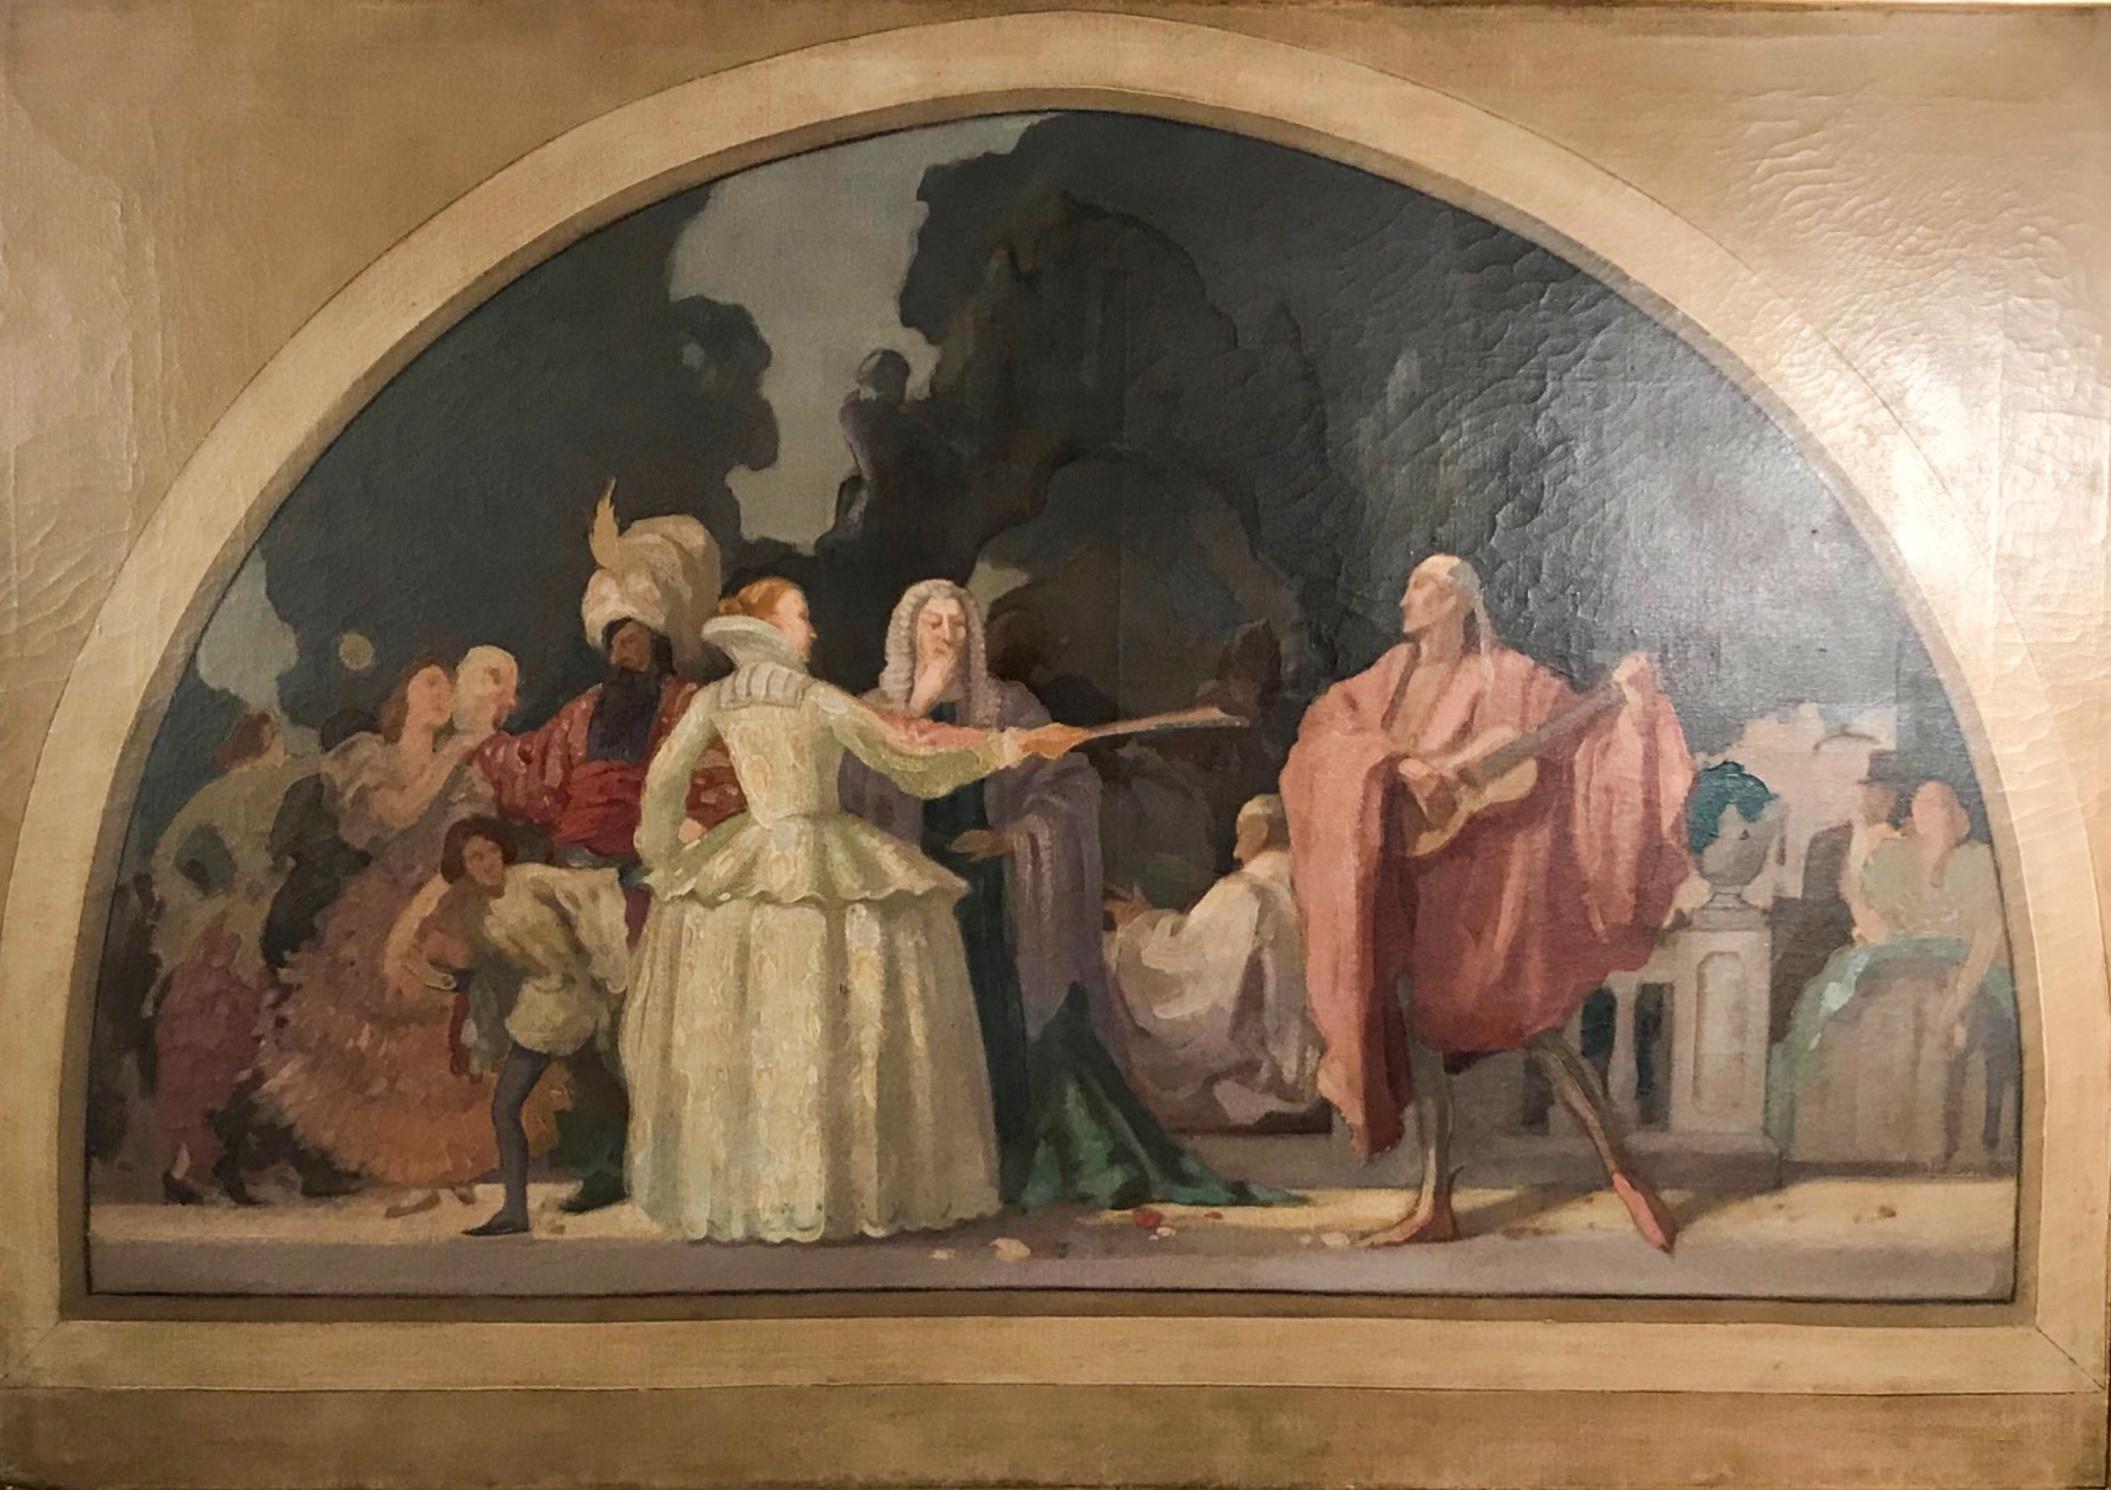 19th century French painting oil/canvas attributed Pierre Puvis de Chavannes.

Large preparatory study for a mural. It is painted in oil on canvas and it depicts a theatrical scene. De Chavannes’ greatest artistic contribution was the medium of